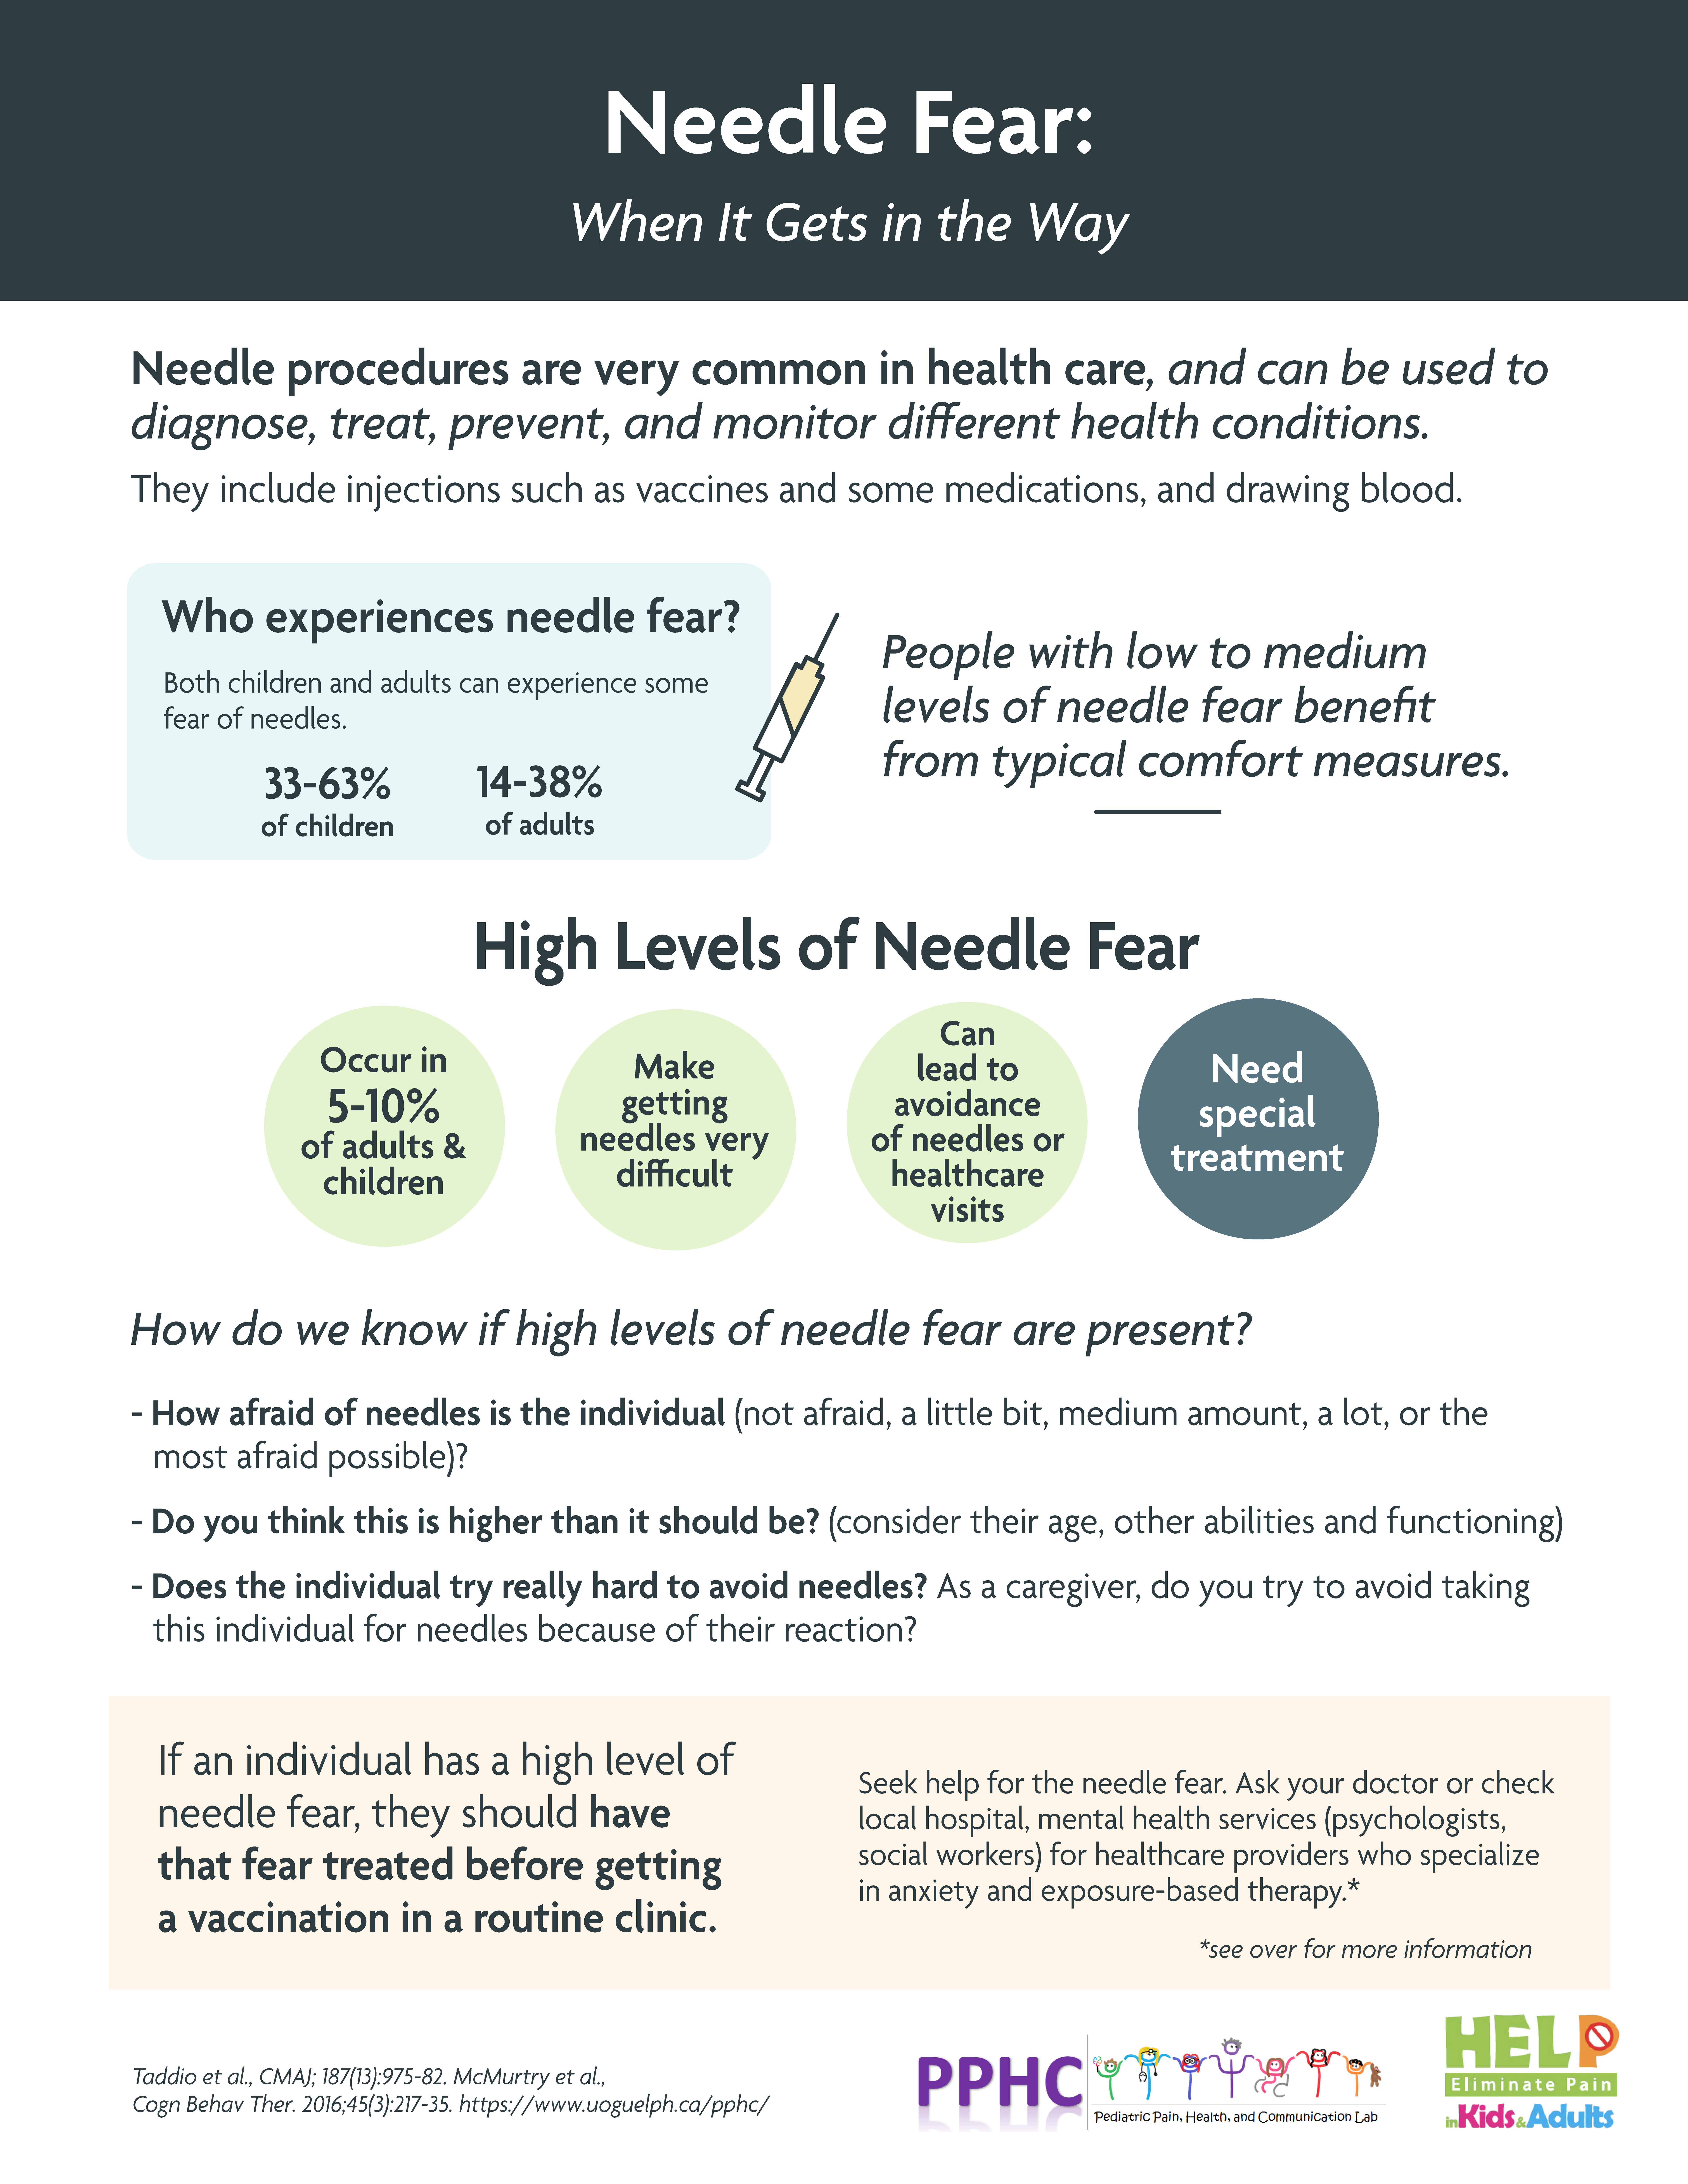 Needle fear: When it gets in the way